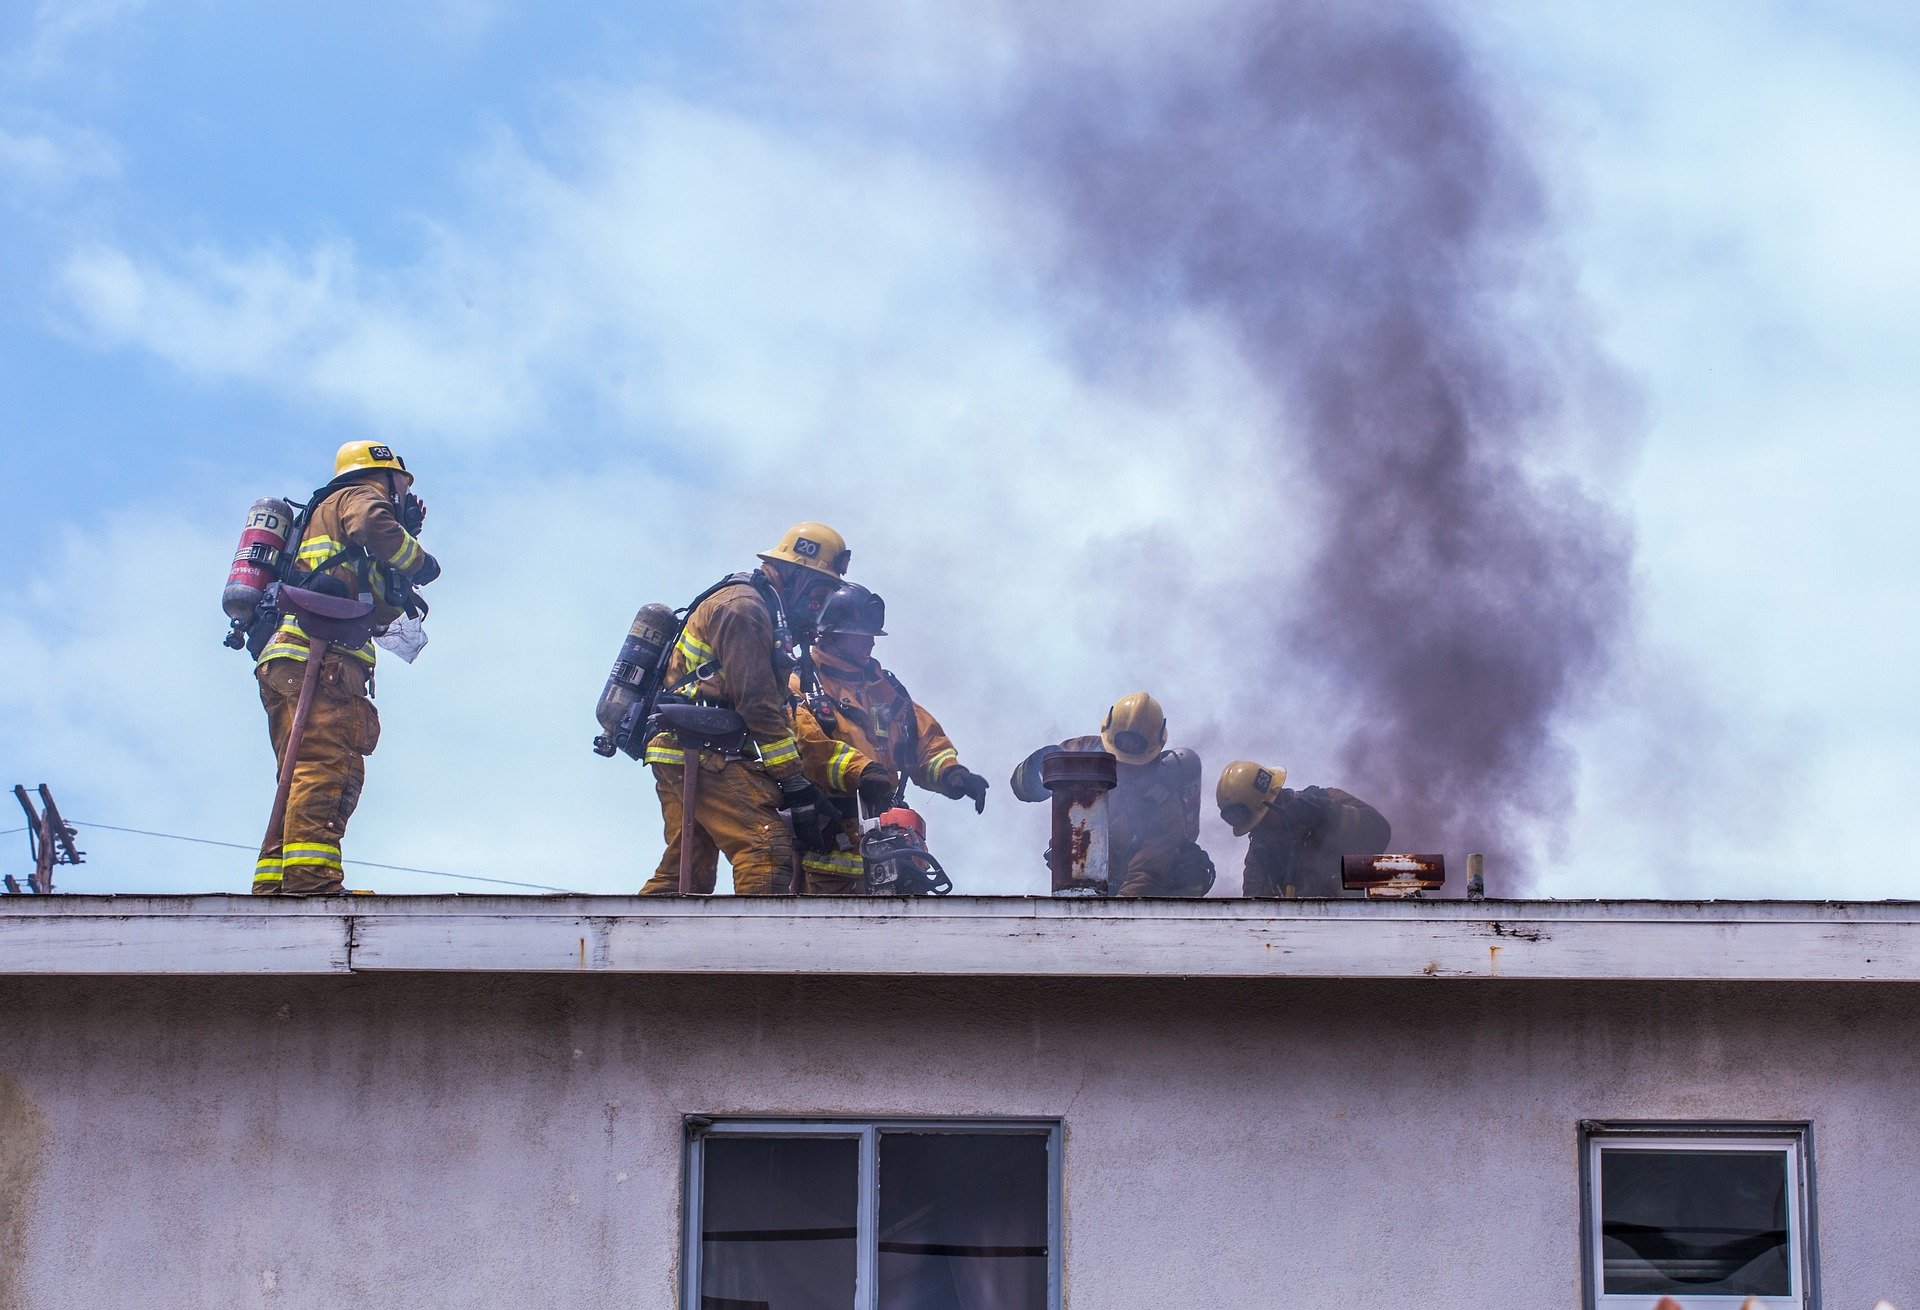 Dryer Vent Cleaning: Recommendations from Firefighters